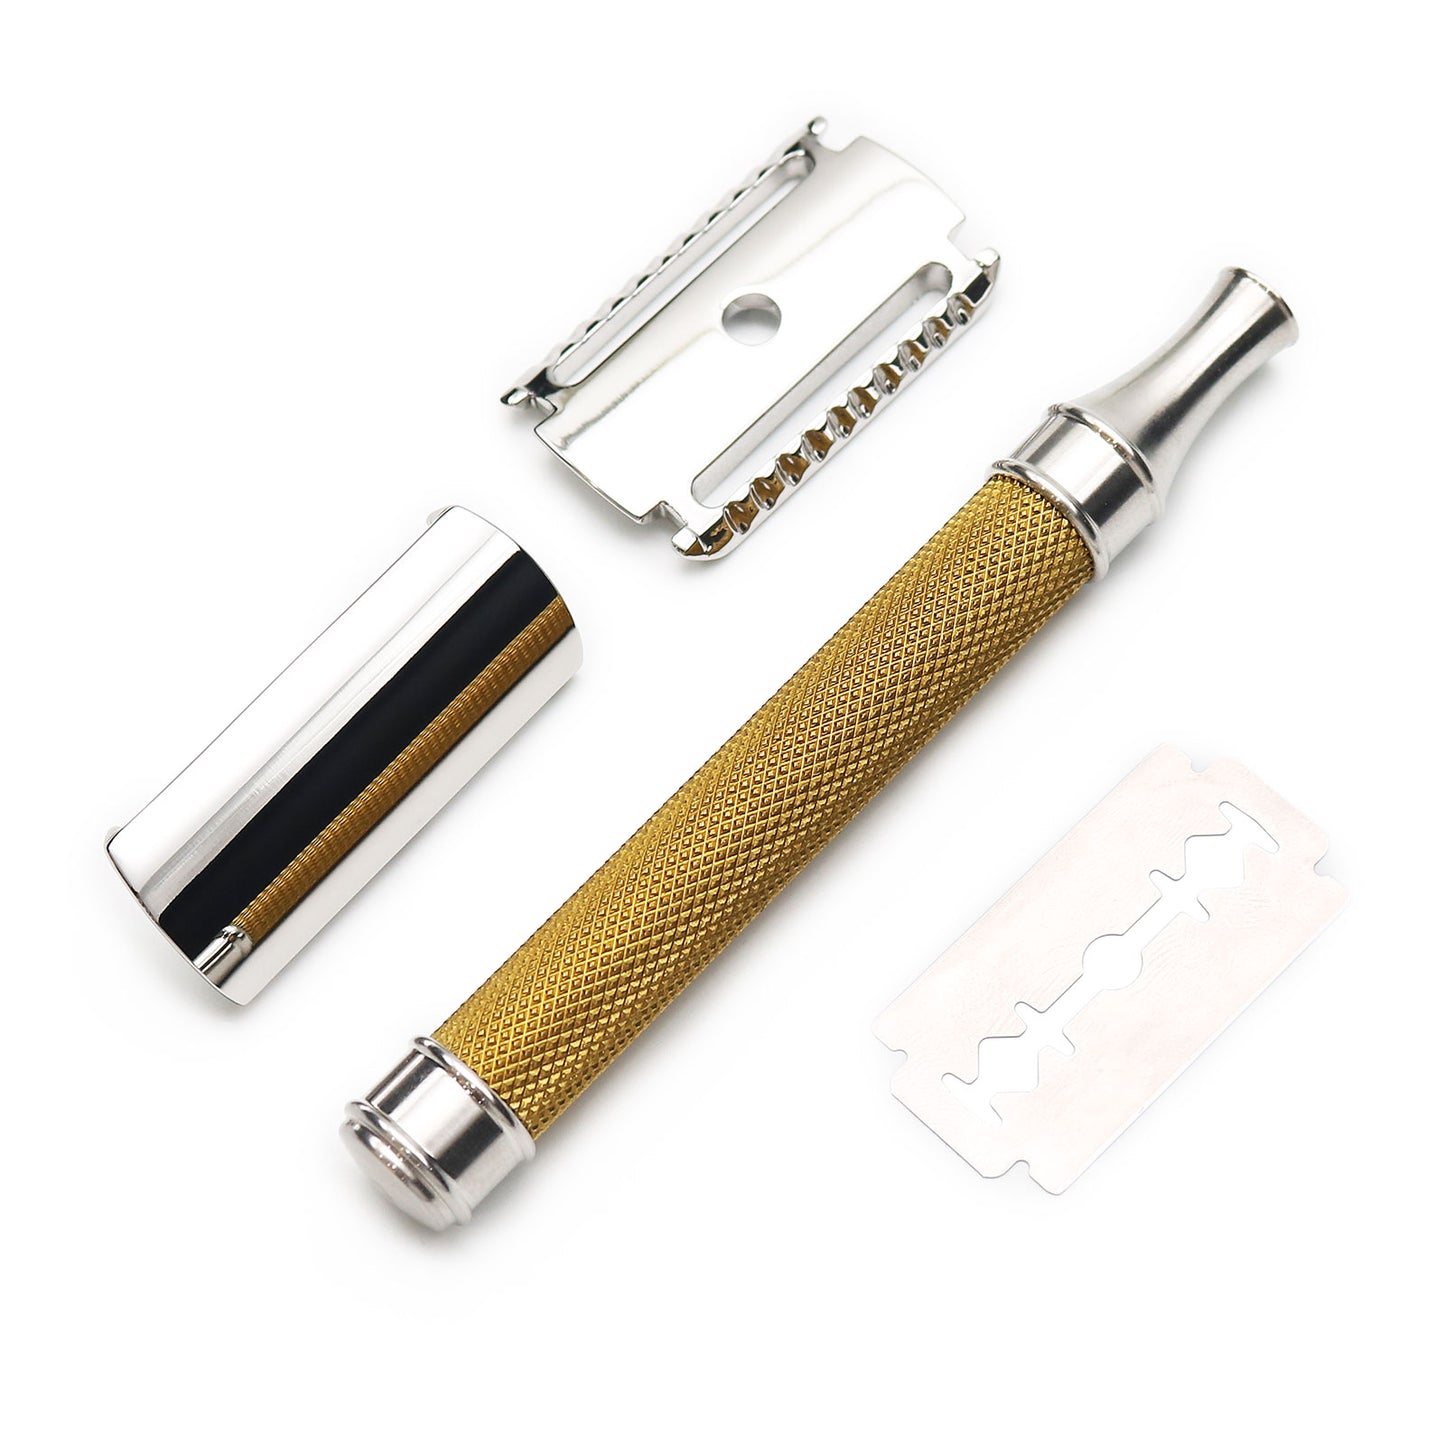 Great Gentleman Palace Shaped Blade Double Edge Shaving Safety Razor with Stainless Steel Handle